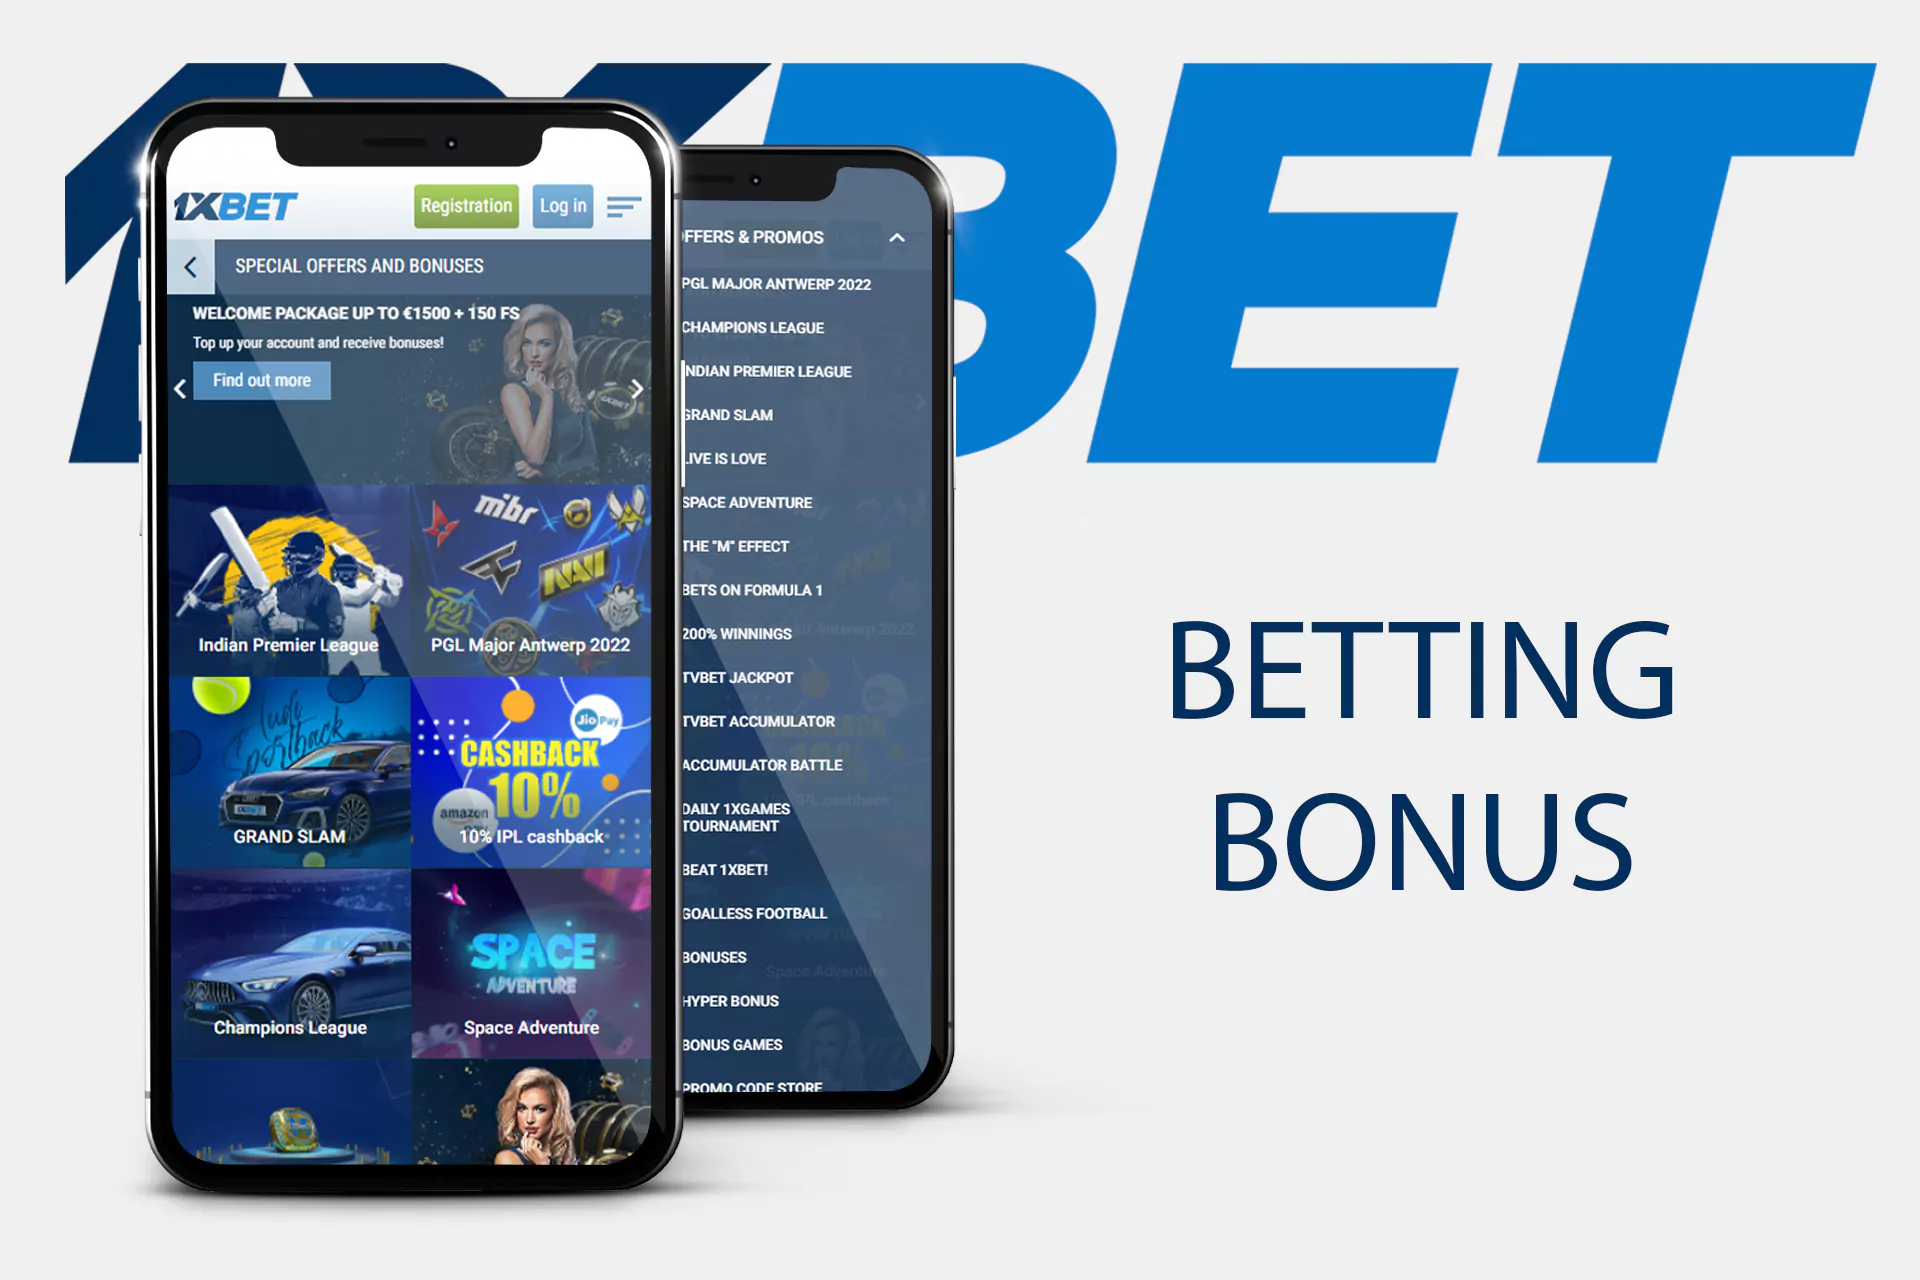 Users of the 1xBet app get a bonus for online betting.